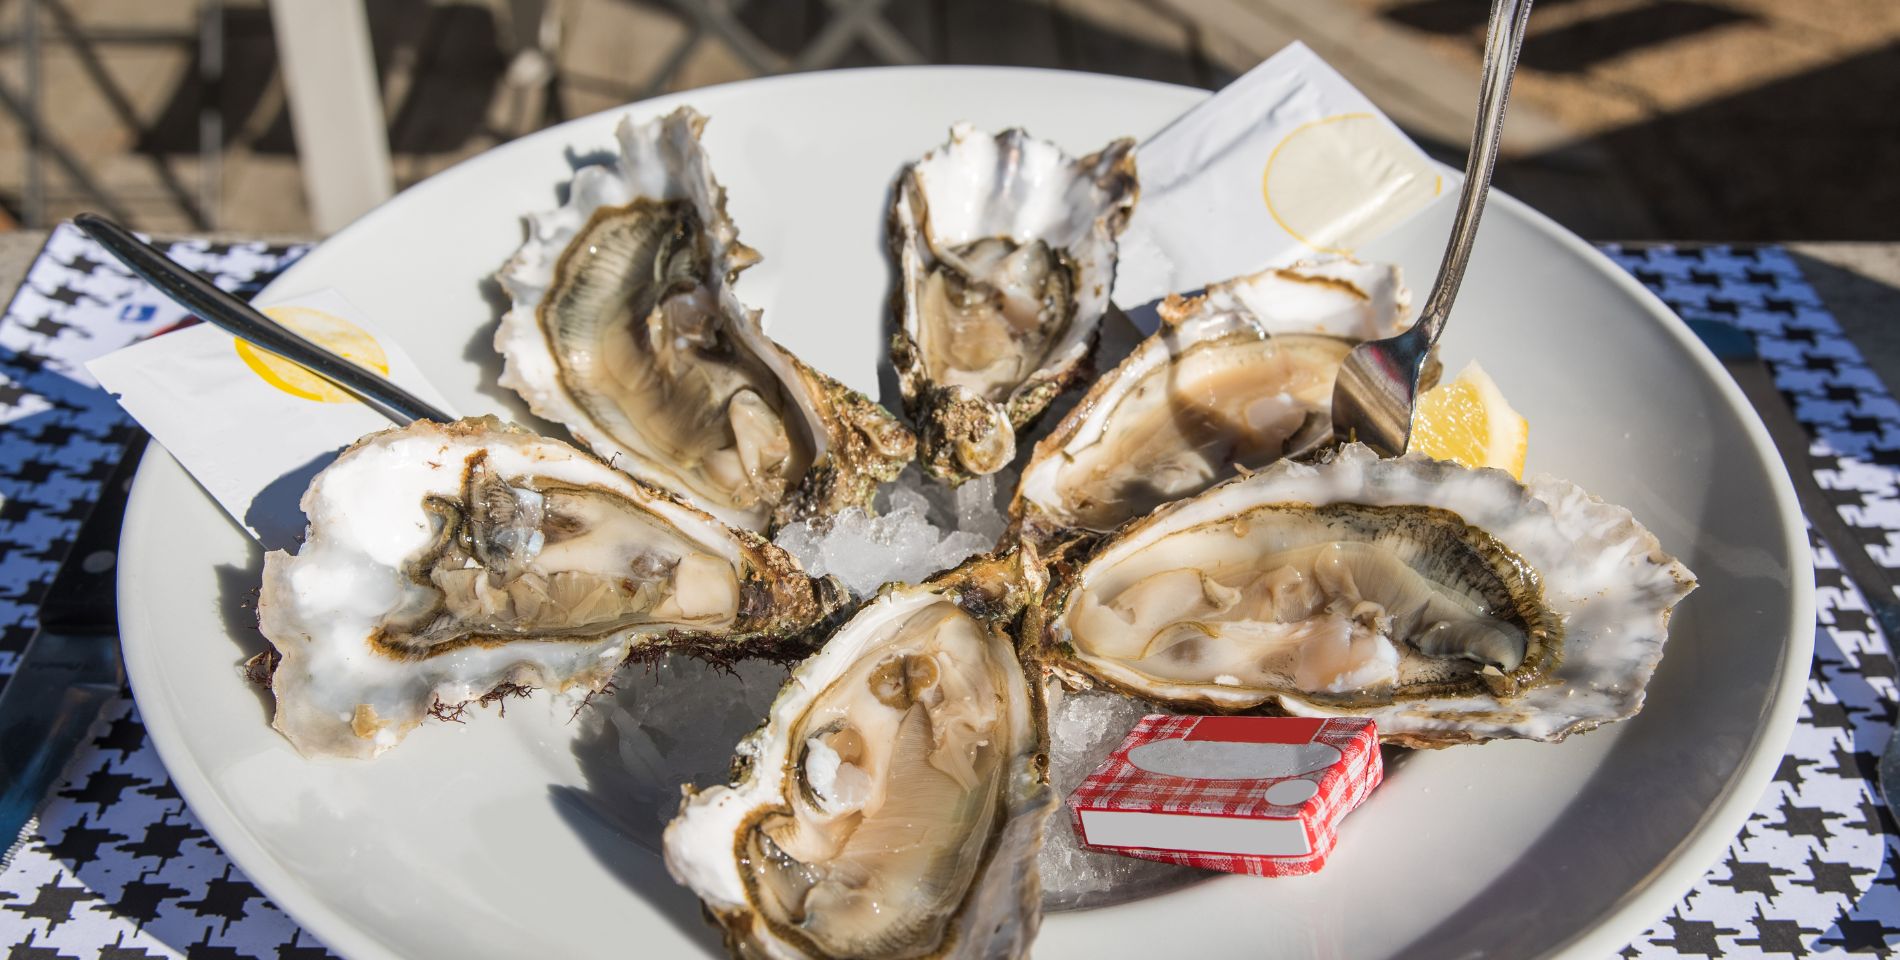 A plate of oysters at a restaurant